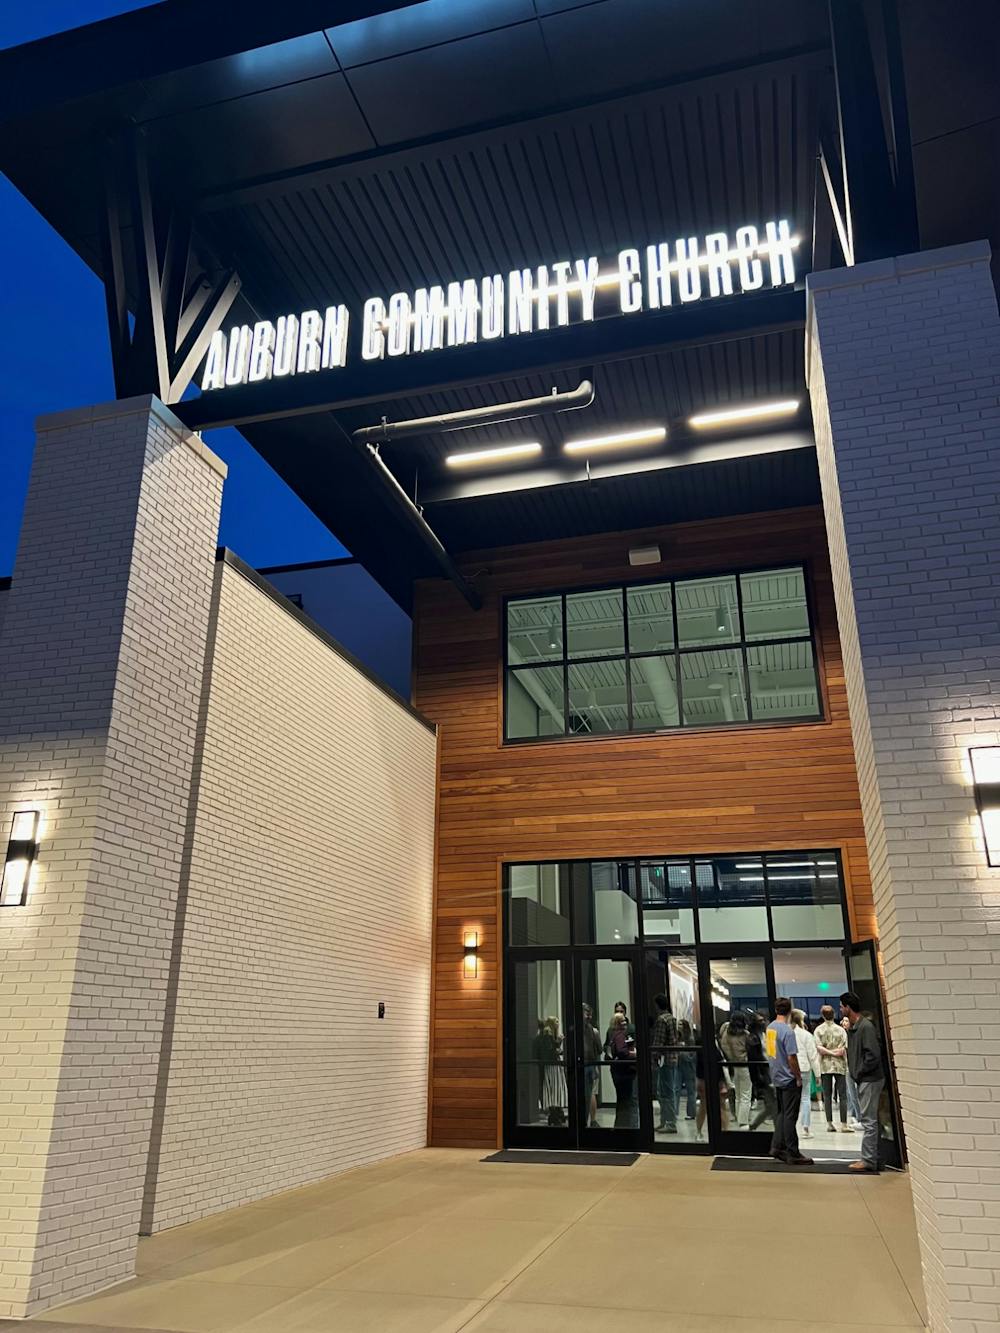 Auburn Community Church opened their new building to the public.